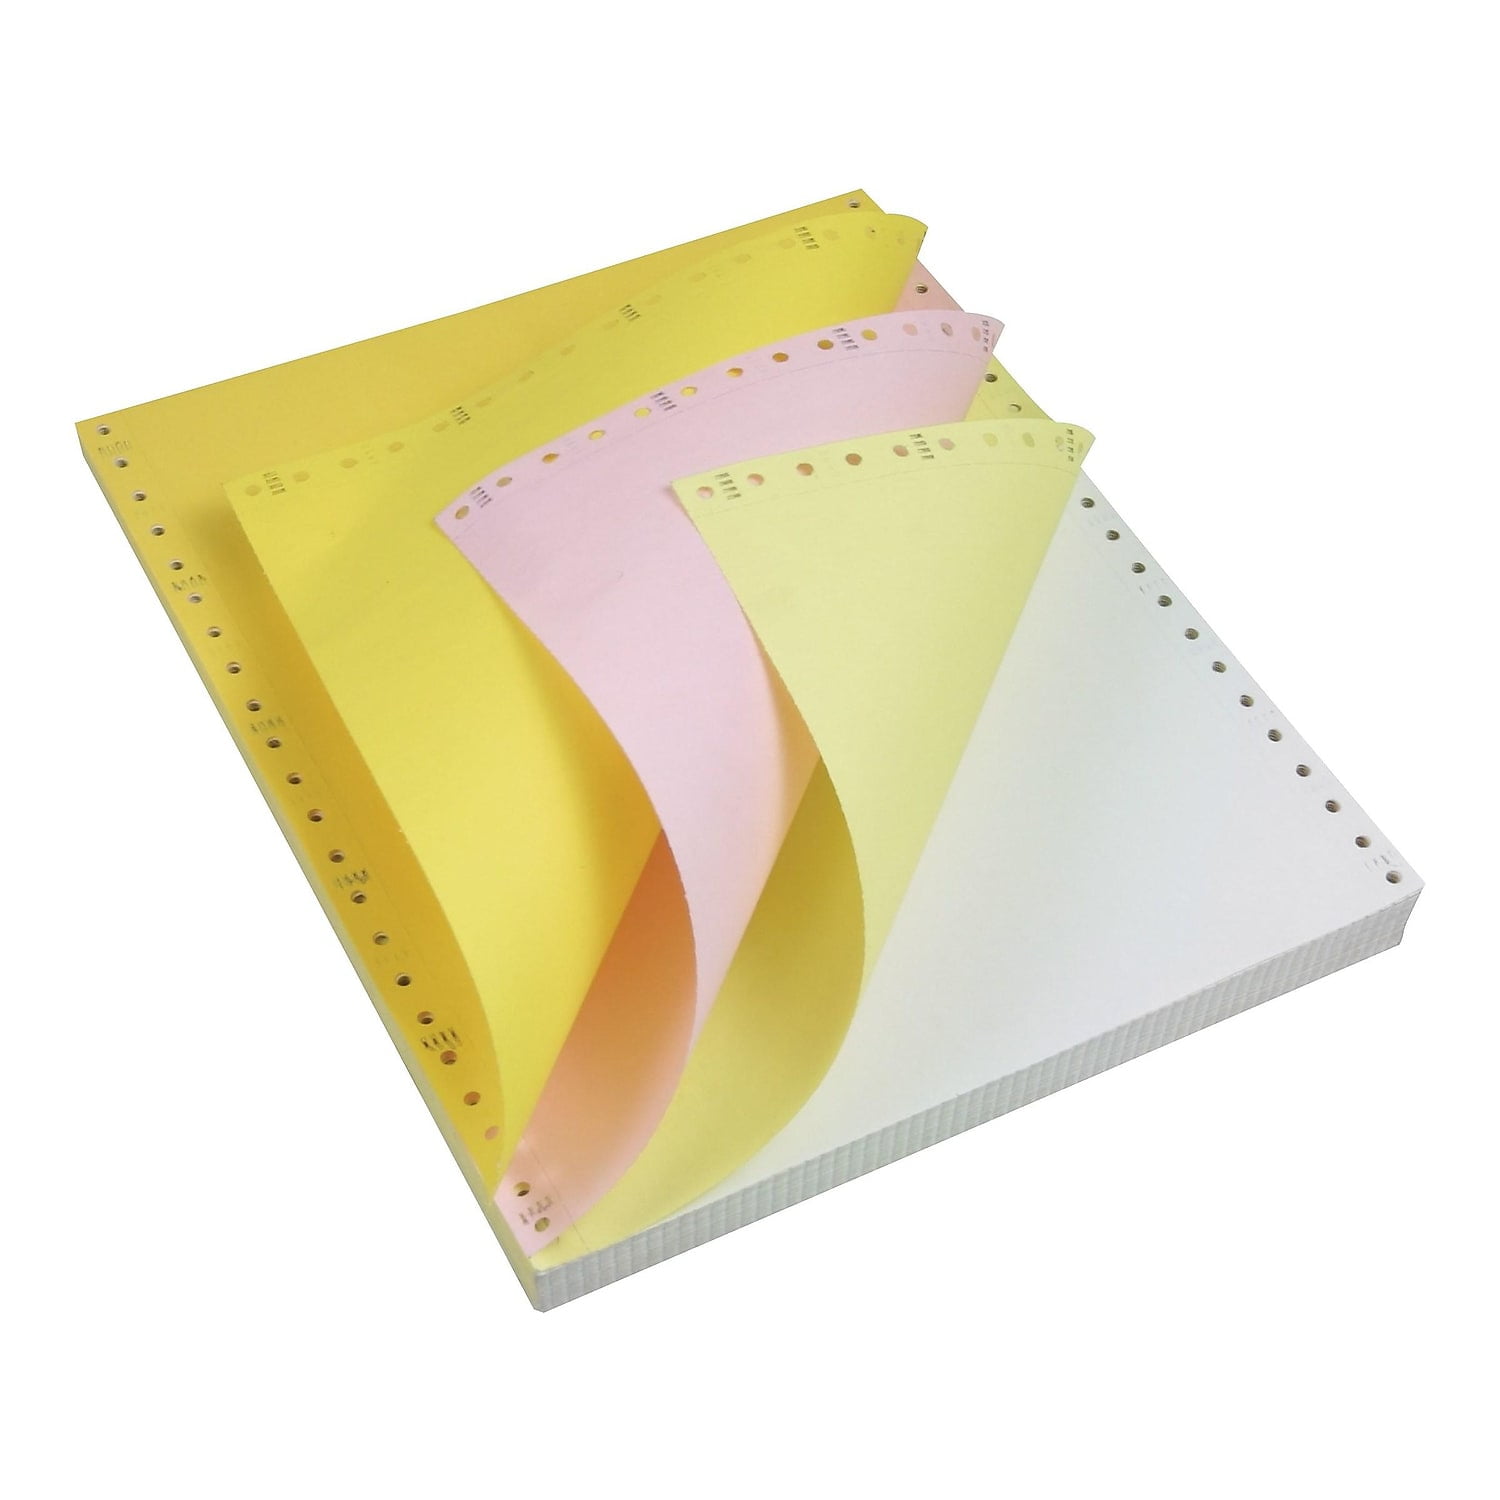 Carbonless Notebook Paper, Discontinued Products, Carbonless Notebook  Paper from Therapy Shoppe Carbonless Notebook Paper, Handwriting Help  Tools